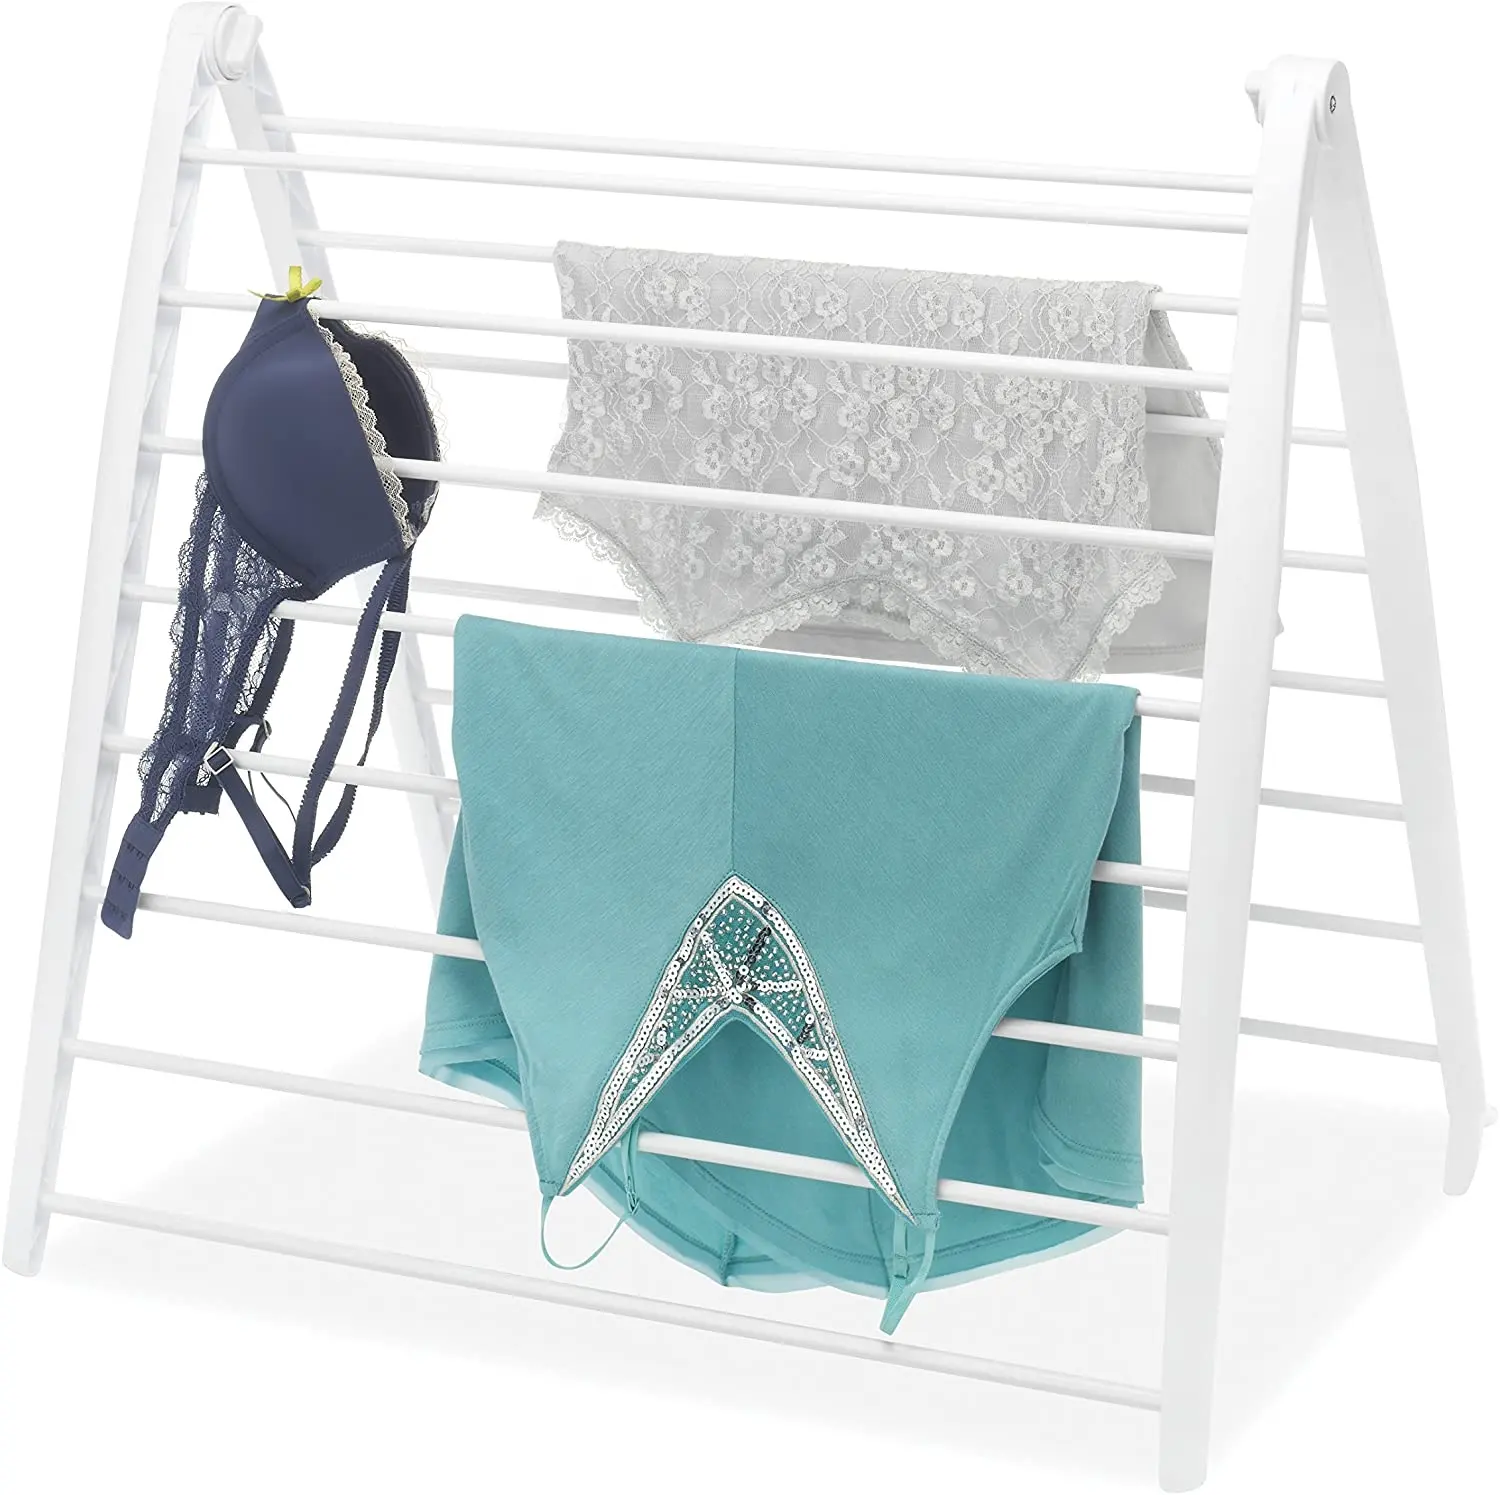 Flat Storage Drying Clothes Drying Rack , Metal Cloth Hanger In Bathroom / Clothes Dryer Rack on the Bathtub light weight